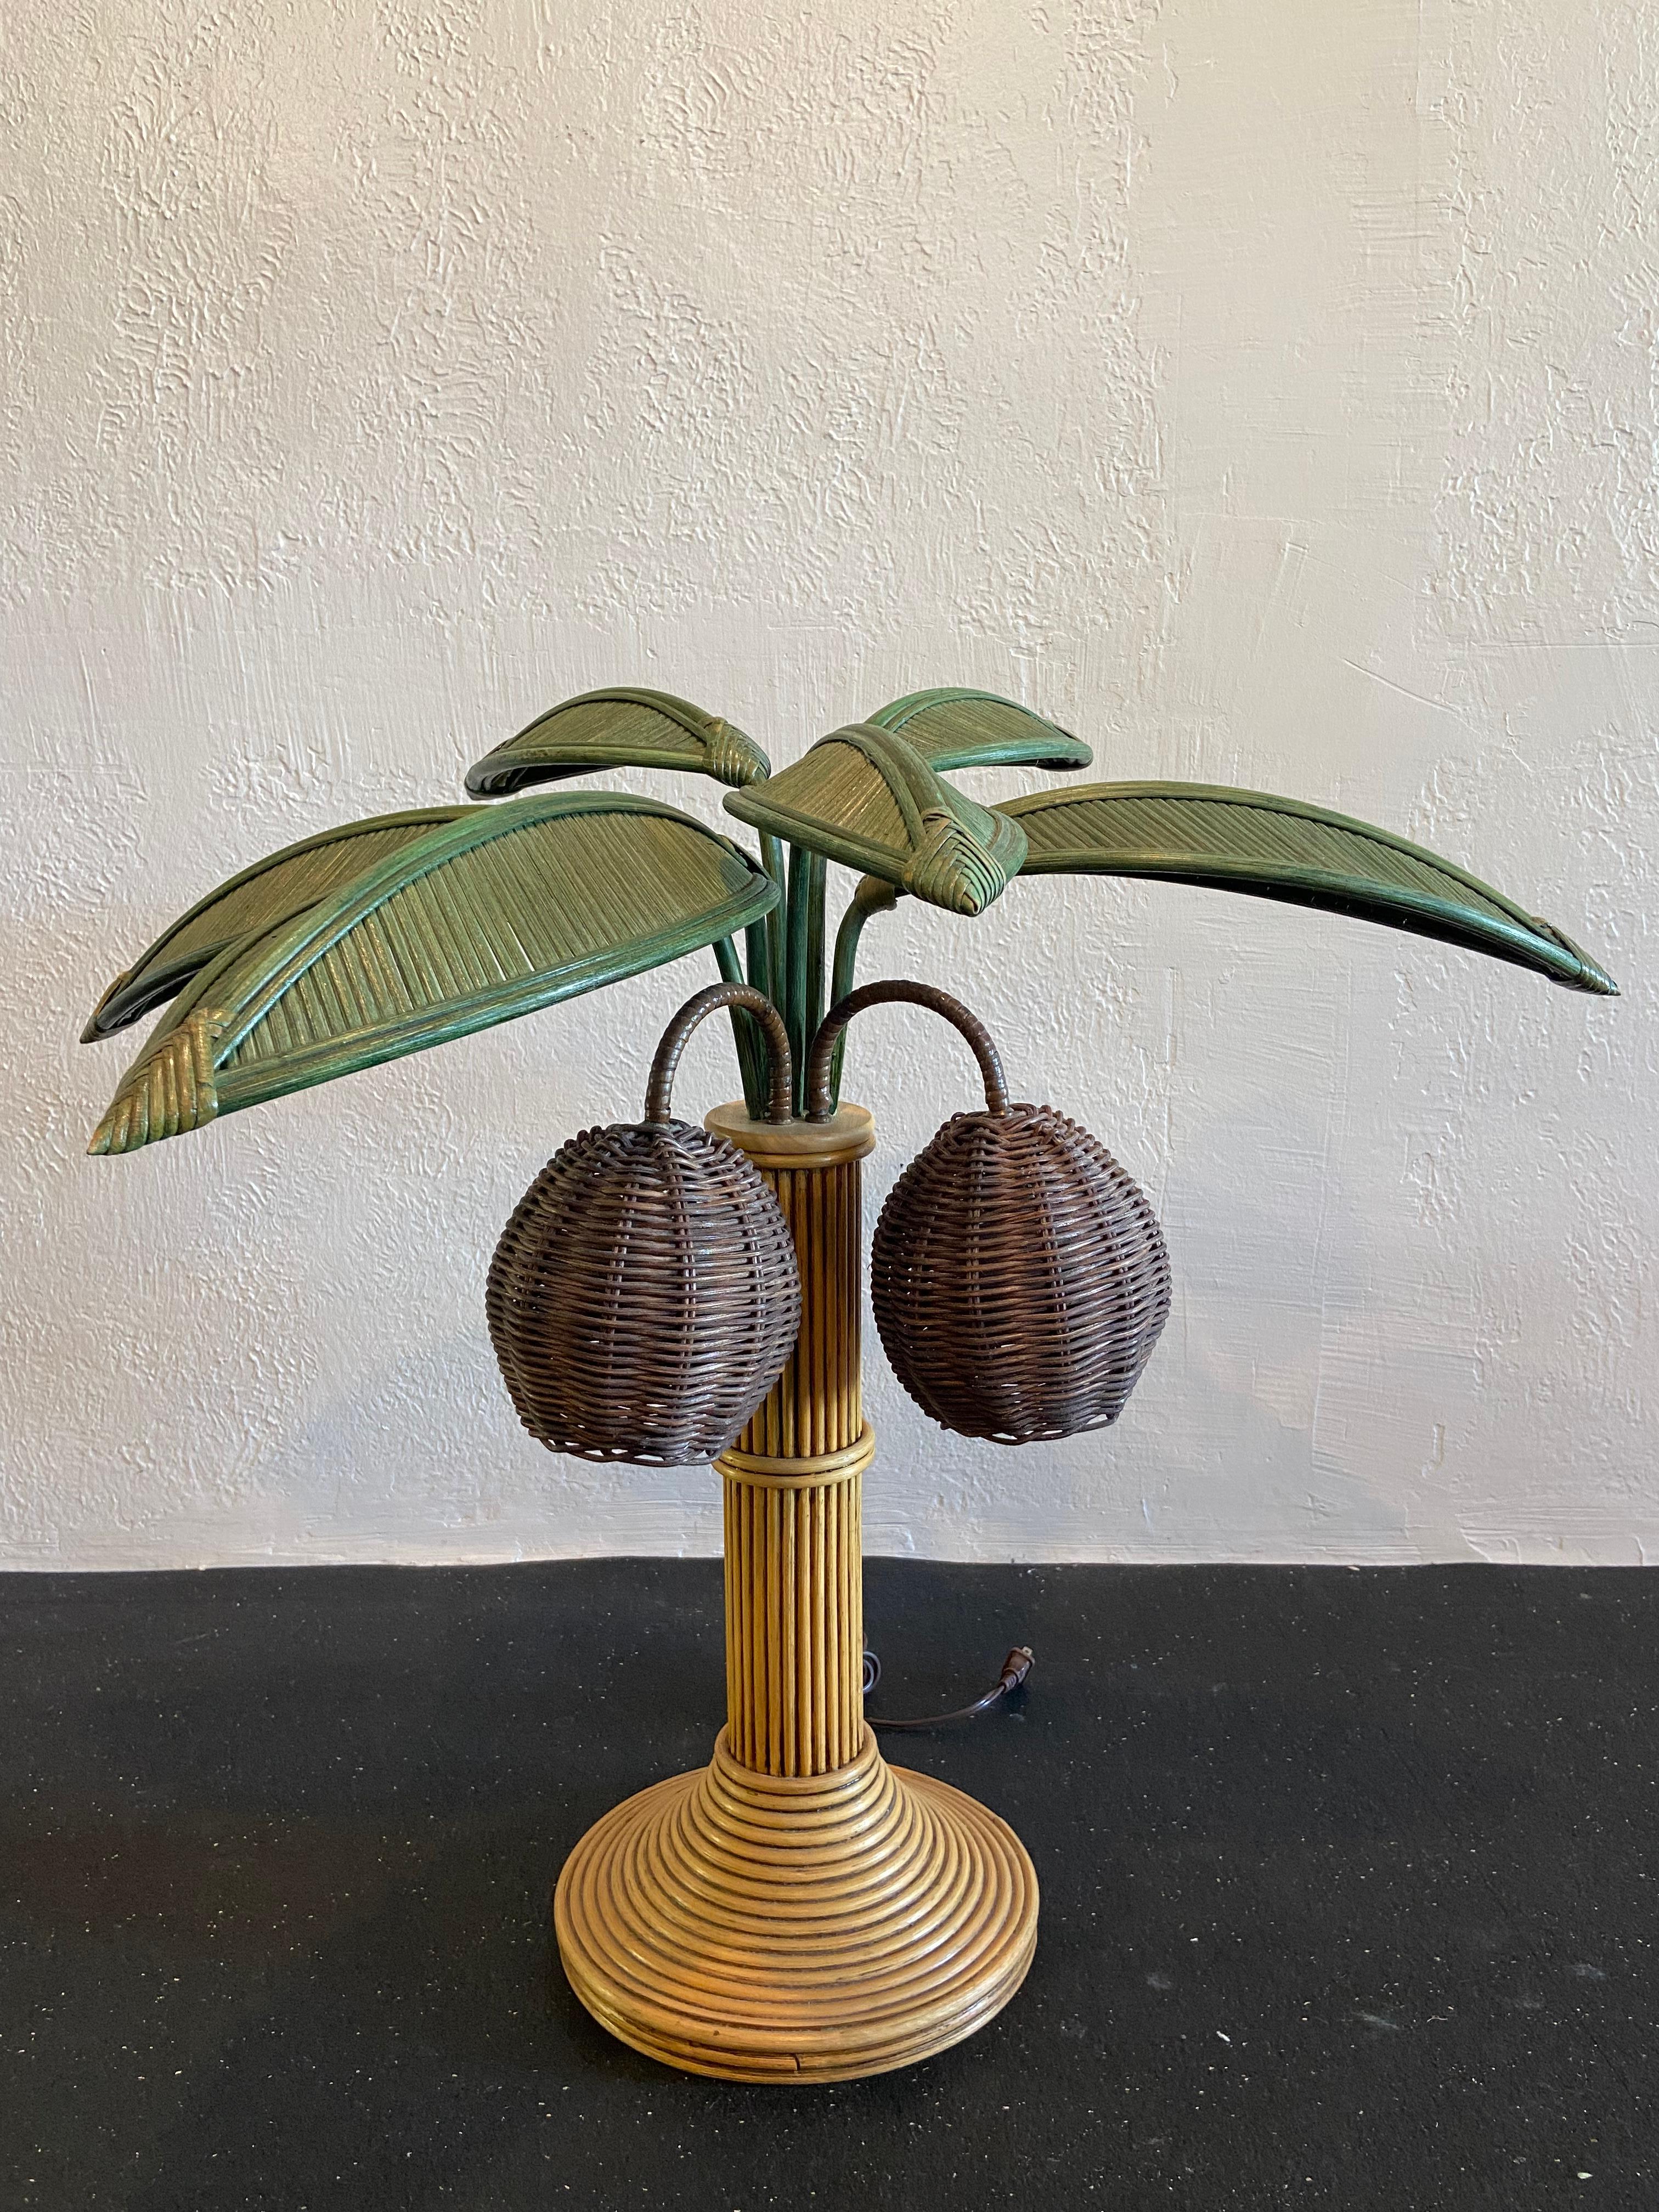 Pair of Mario Torres Lopez attributed pencil reed palm tree table lamps. Removable/adjustable leaves allow for multiple arrangements. 

Would work well in a variety of interiors such as modern, mid century modern, Hollywood regency, etc. Piece